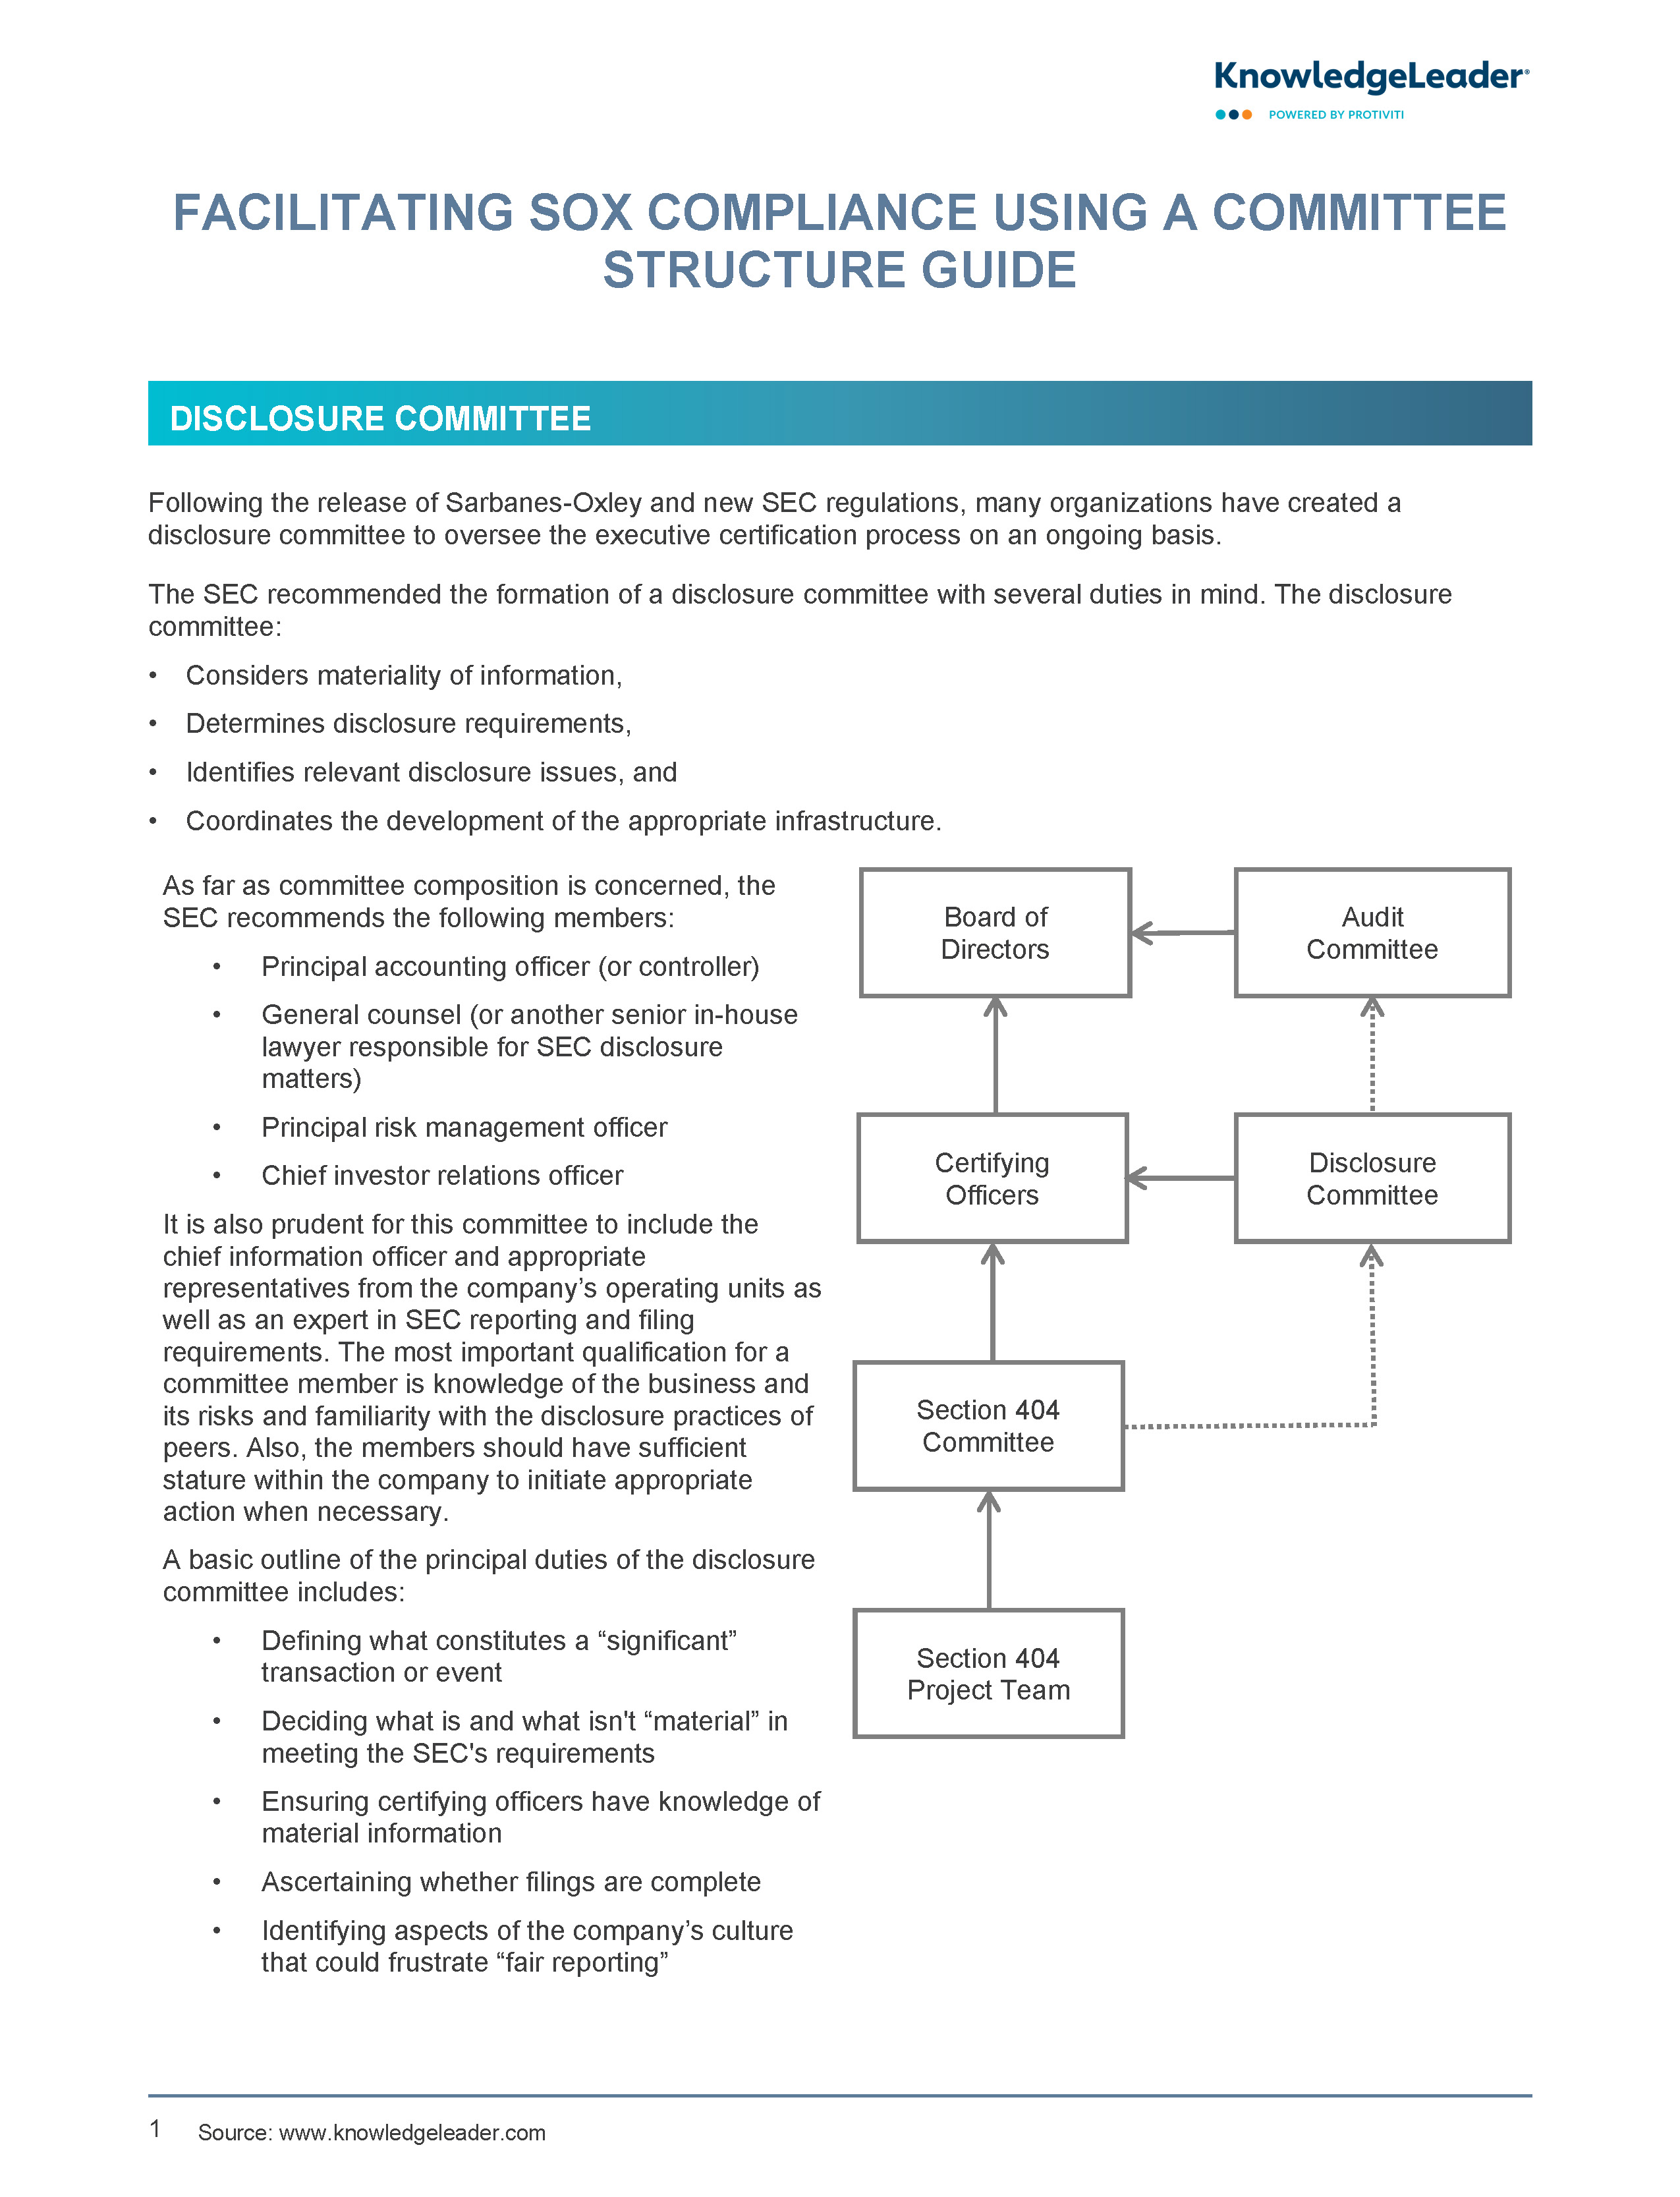 Screenshot of the first page of Facilitating SOX Compliance Using a Committee Structure